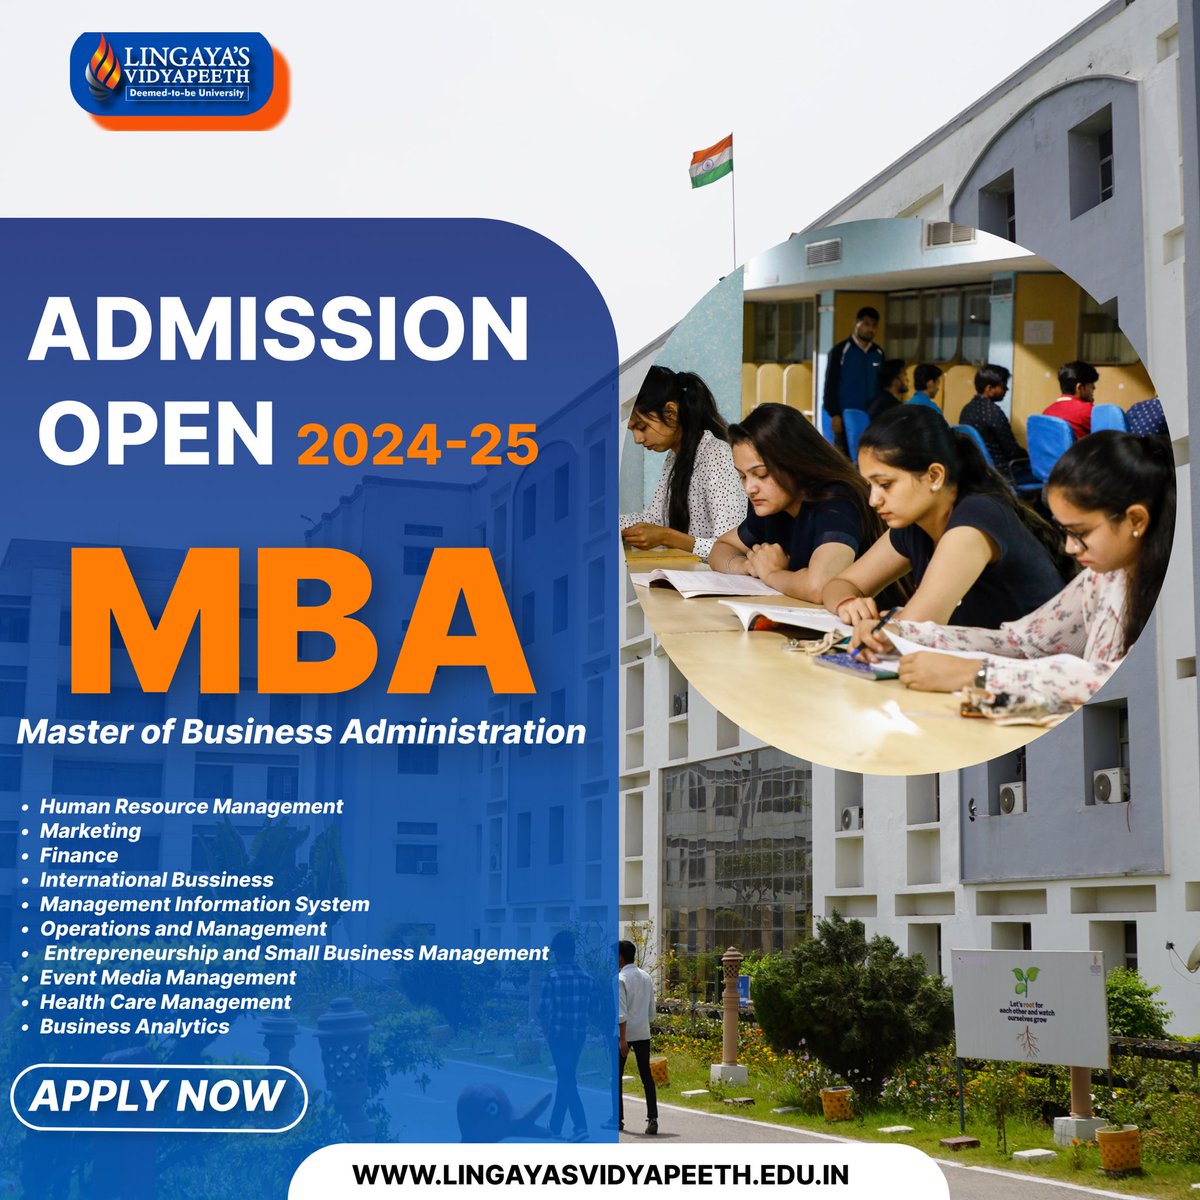 Delve into the dynamic world of business administration with Lingaya's Vidyapeeth #MBA courses. 
Your future in business starts here!
#admissionopen2024_

#bestcollege #college #university #bestuniversity #management #managementskills #education #educationmatters